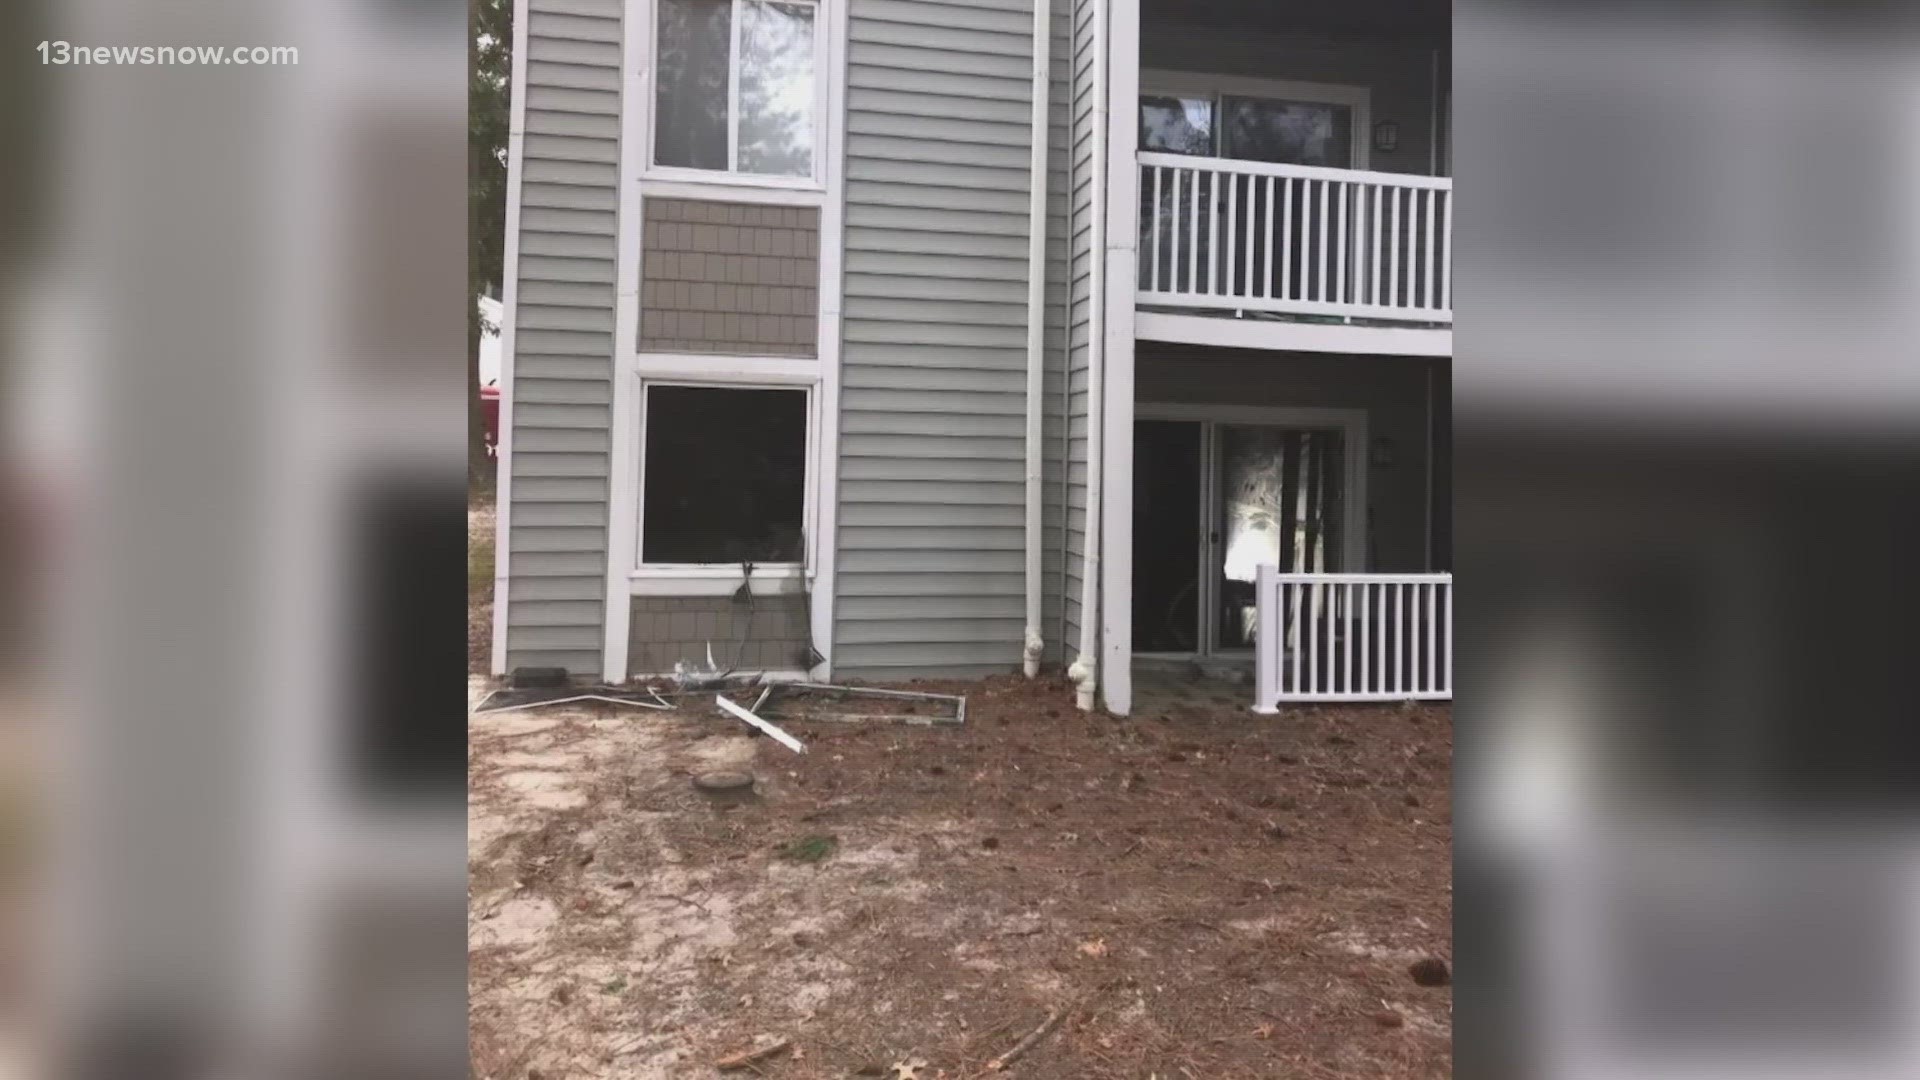 Around 5:45 p.m., the Virginia Beach Fire Department went to Linkhorn Park Apartments for report of a fire on the 500 block of Pine Song Lane.